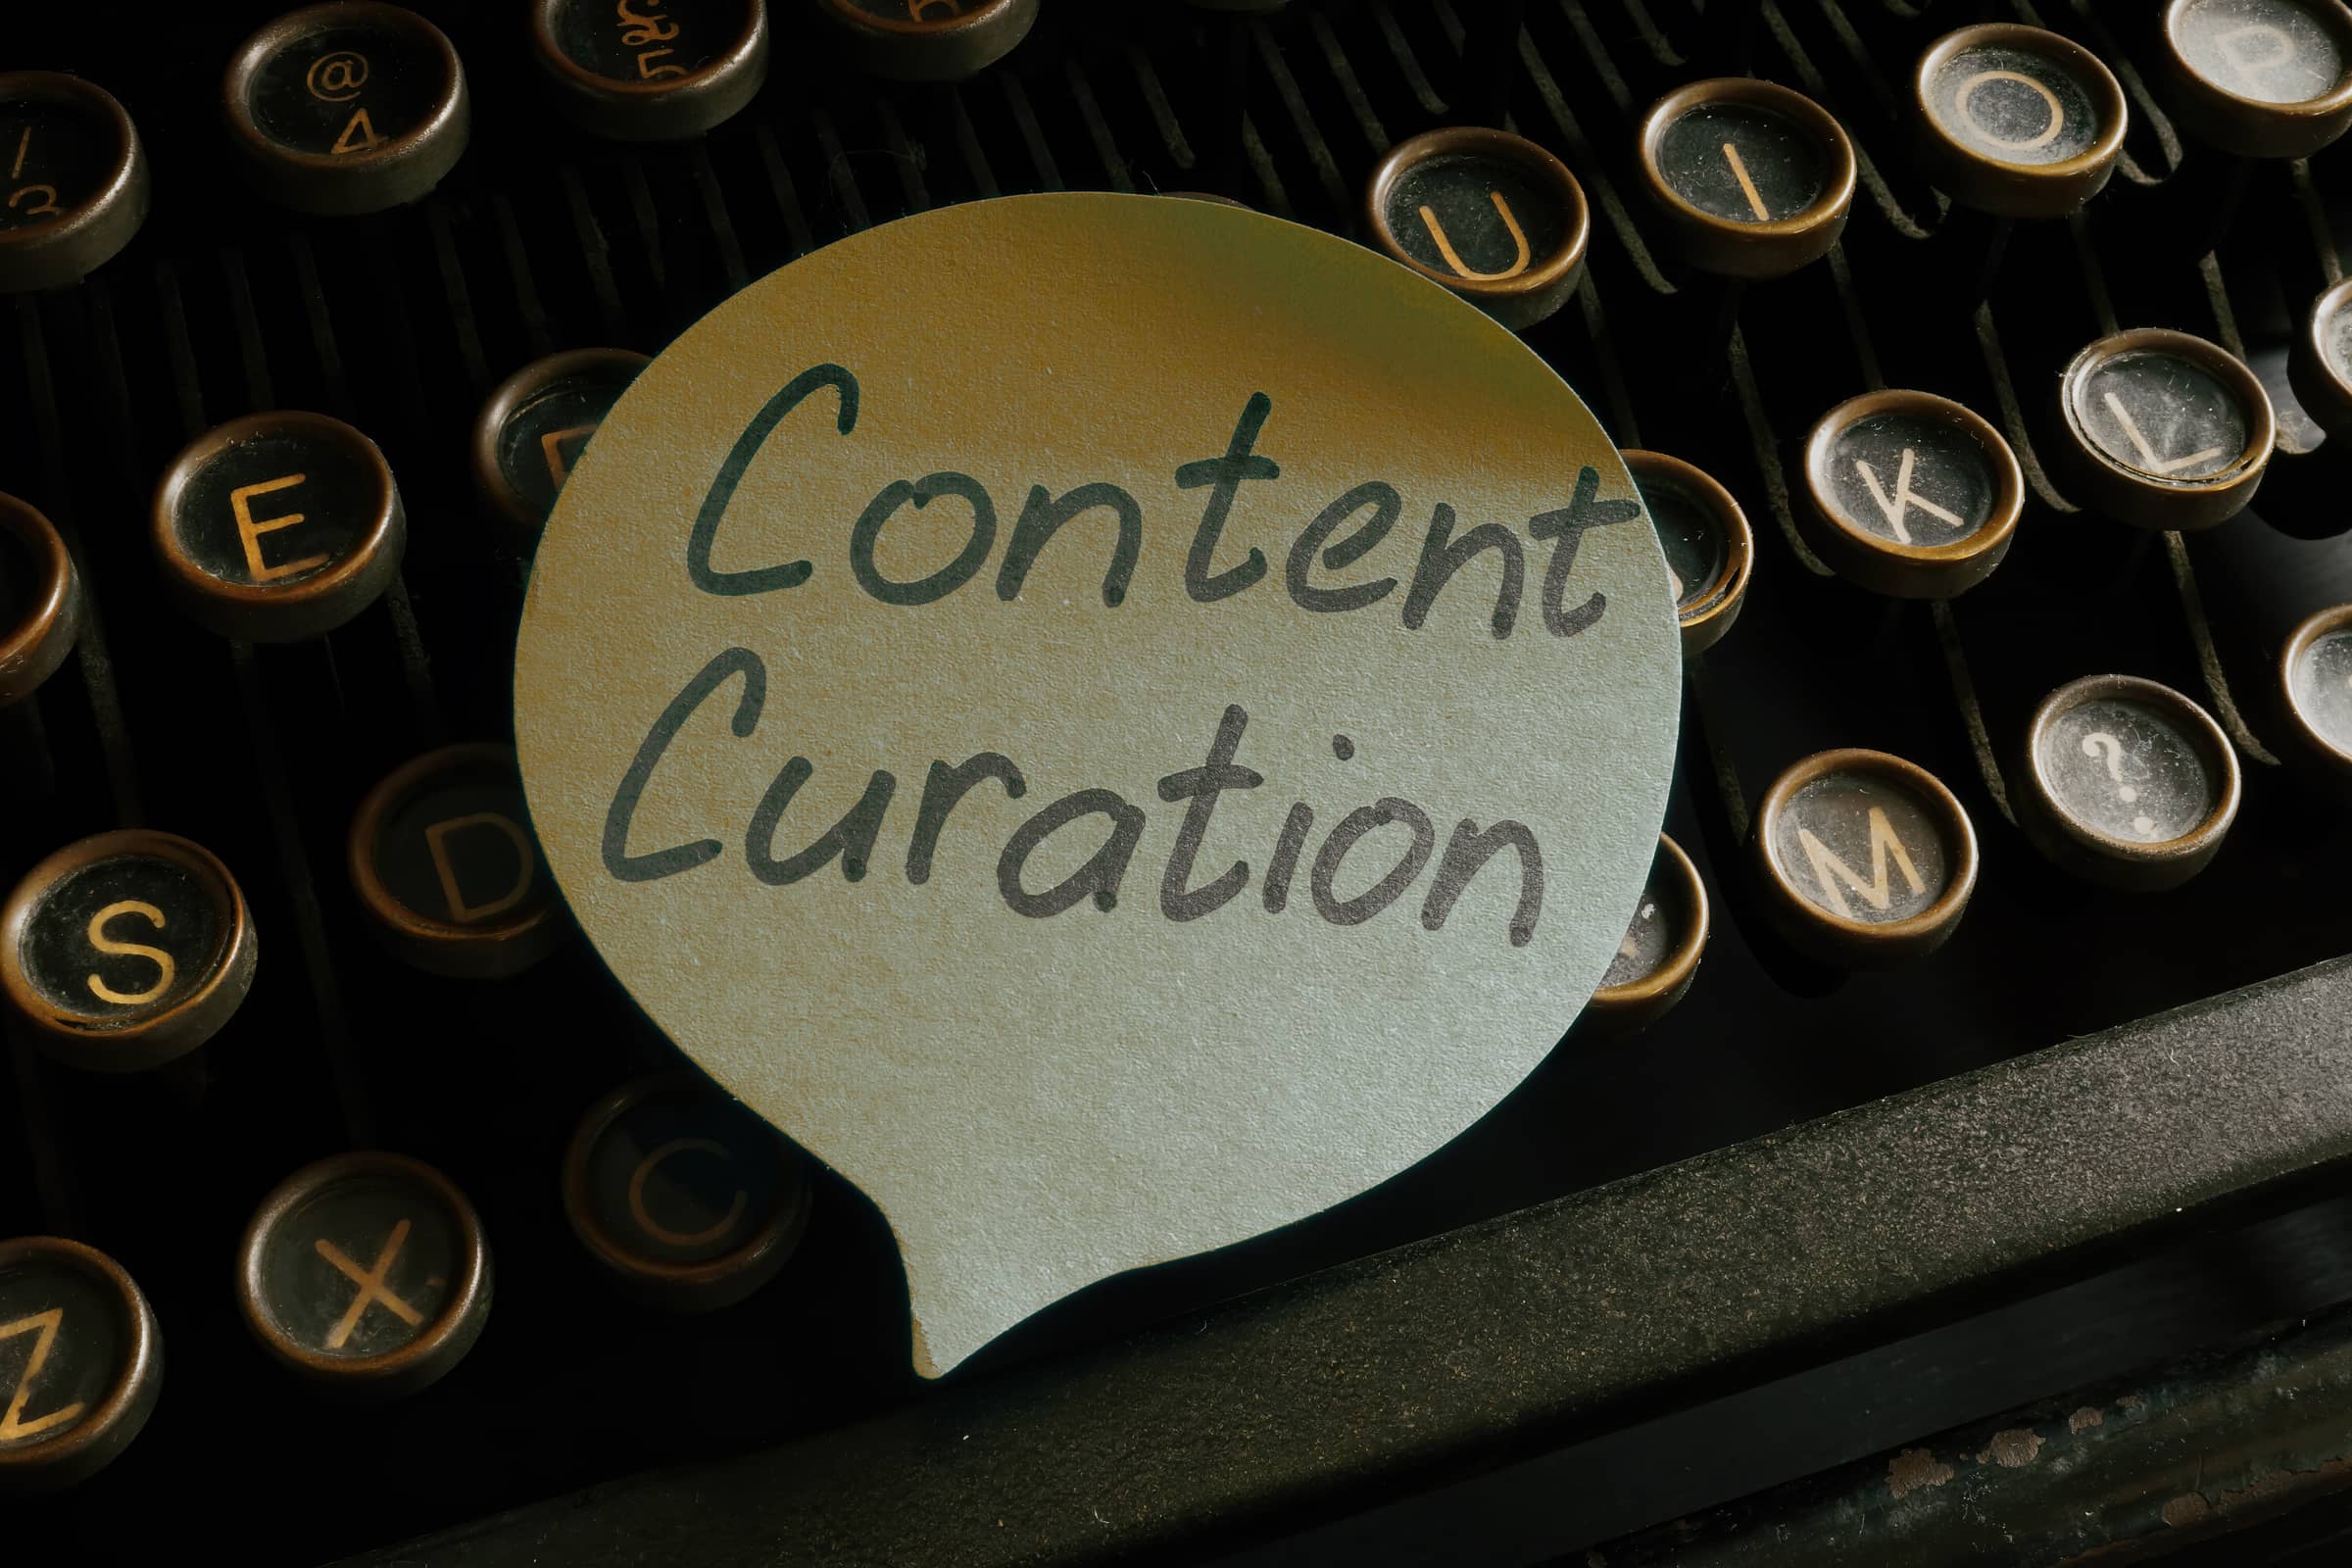 Content Curation for SEO